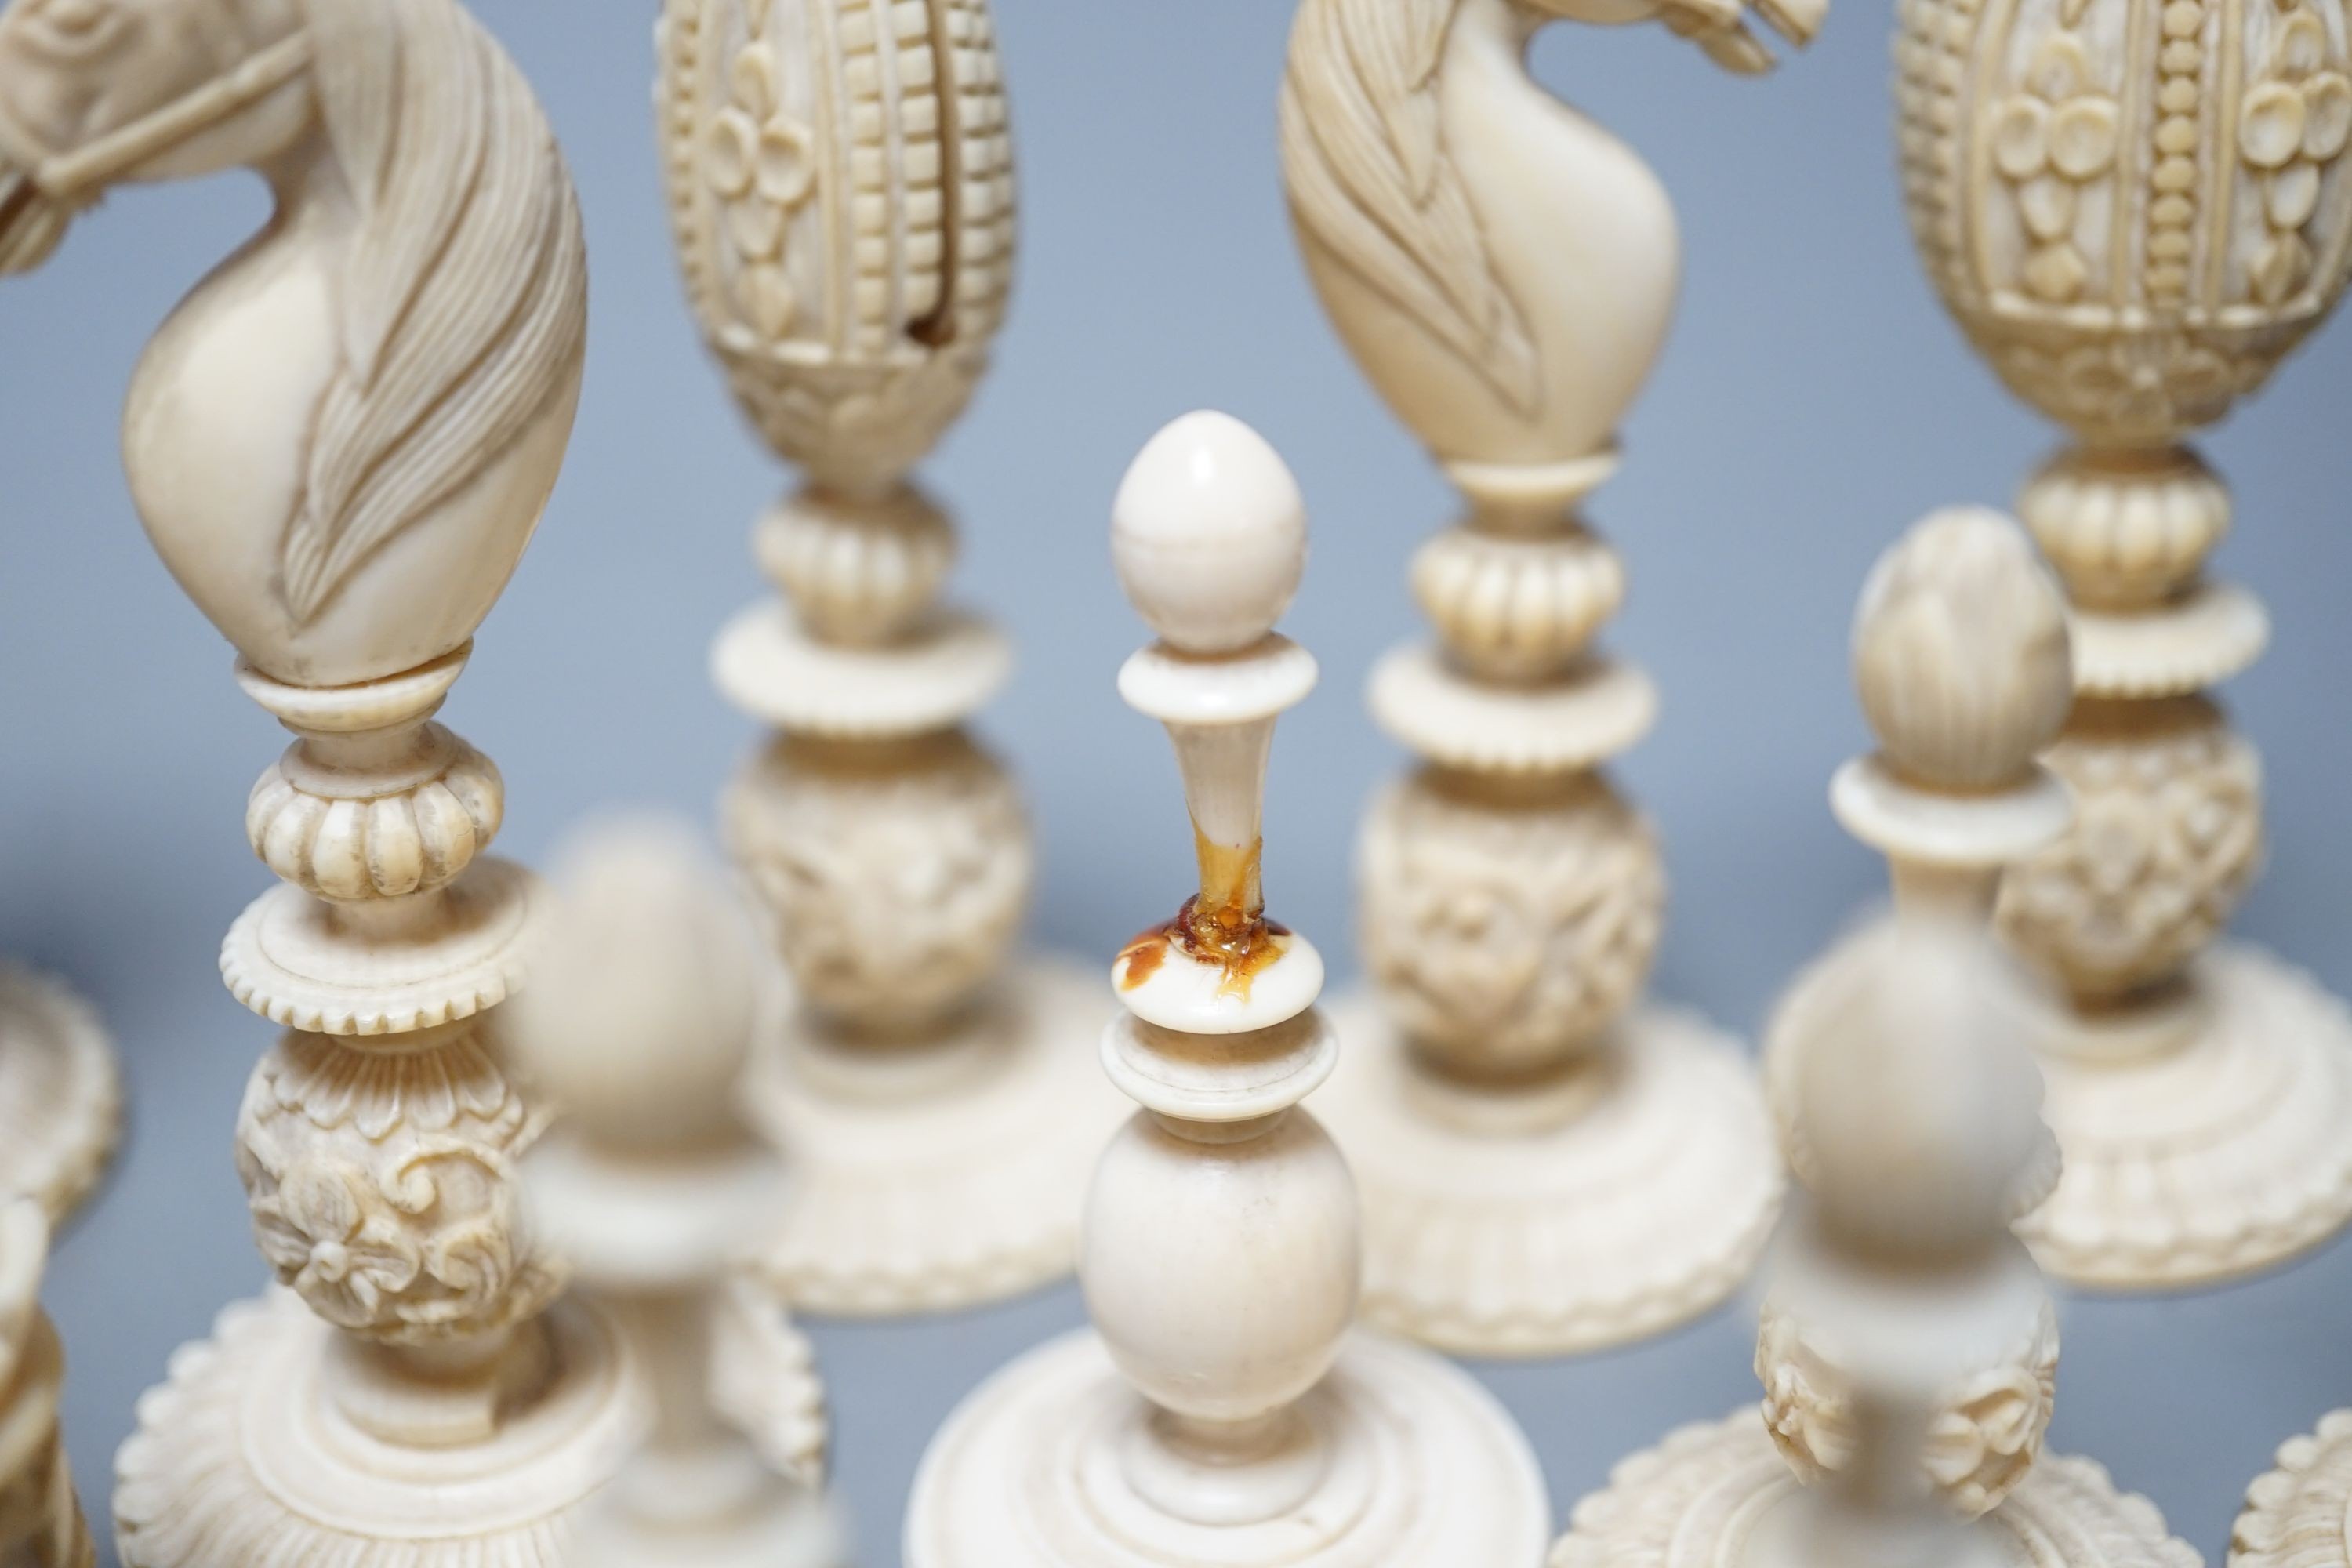 A 19th century Chinese export Burmese pattern carved and stained ivory chess set, one white pawn associated